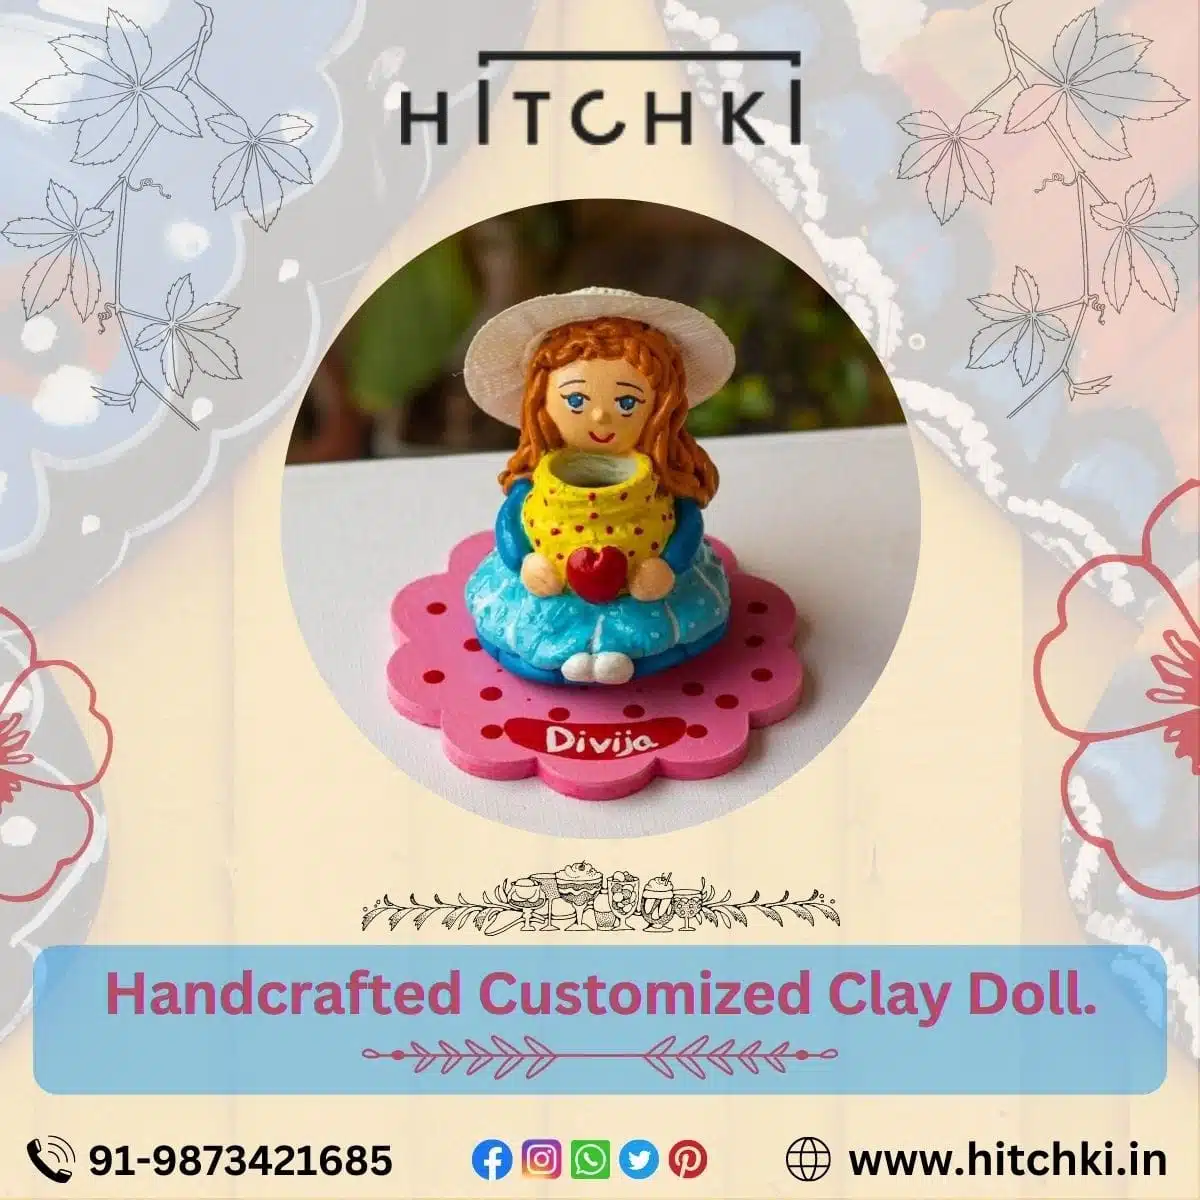 Cute And Colourful Handcrafted Customized Clay Doll Hitchki